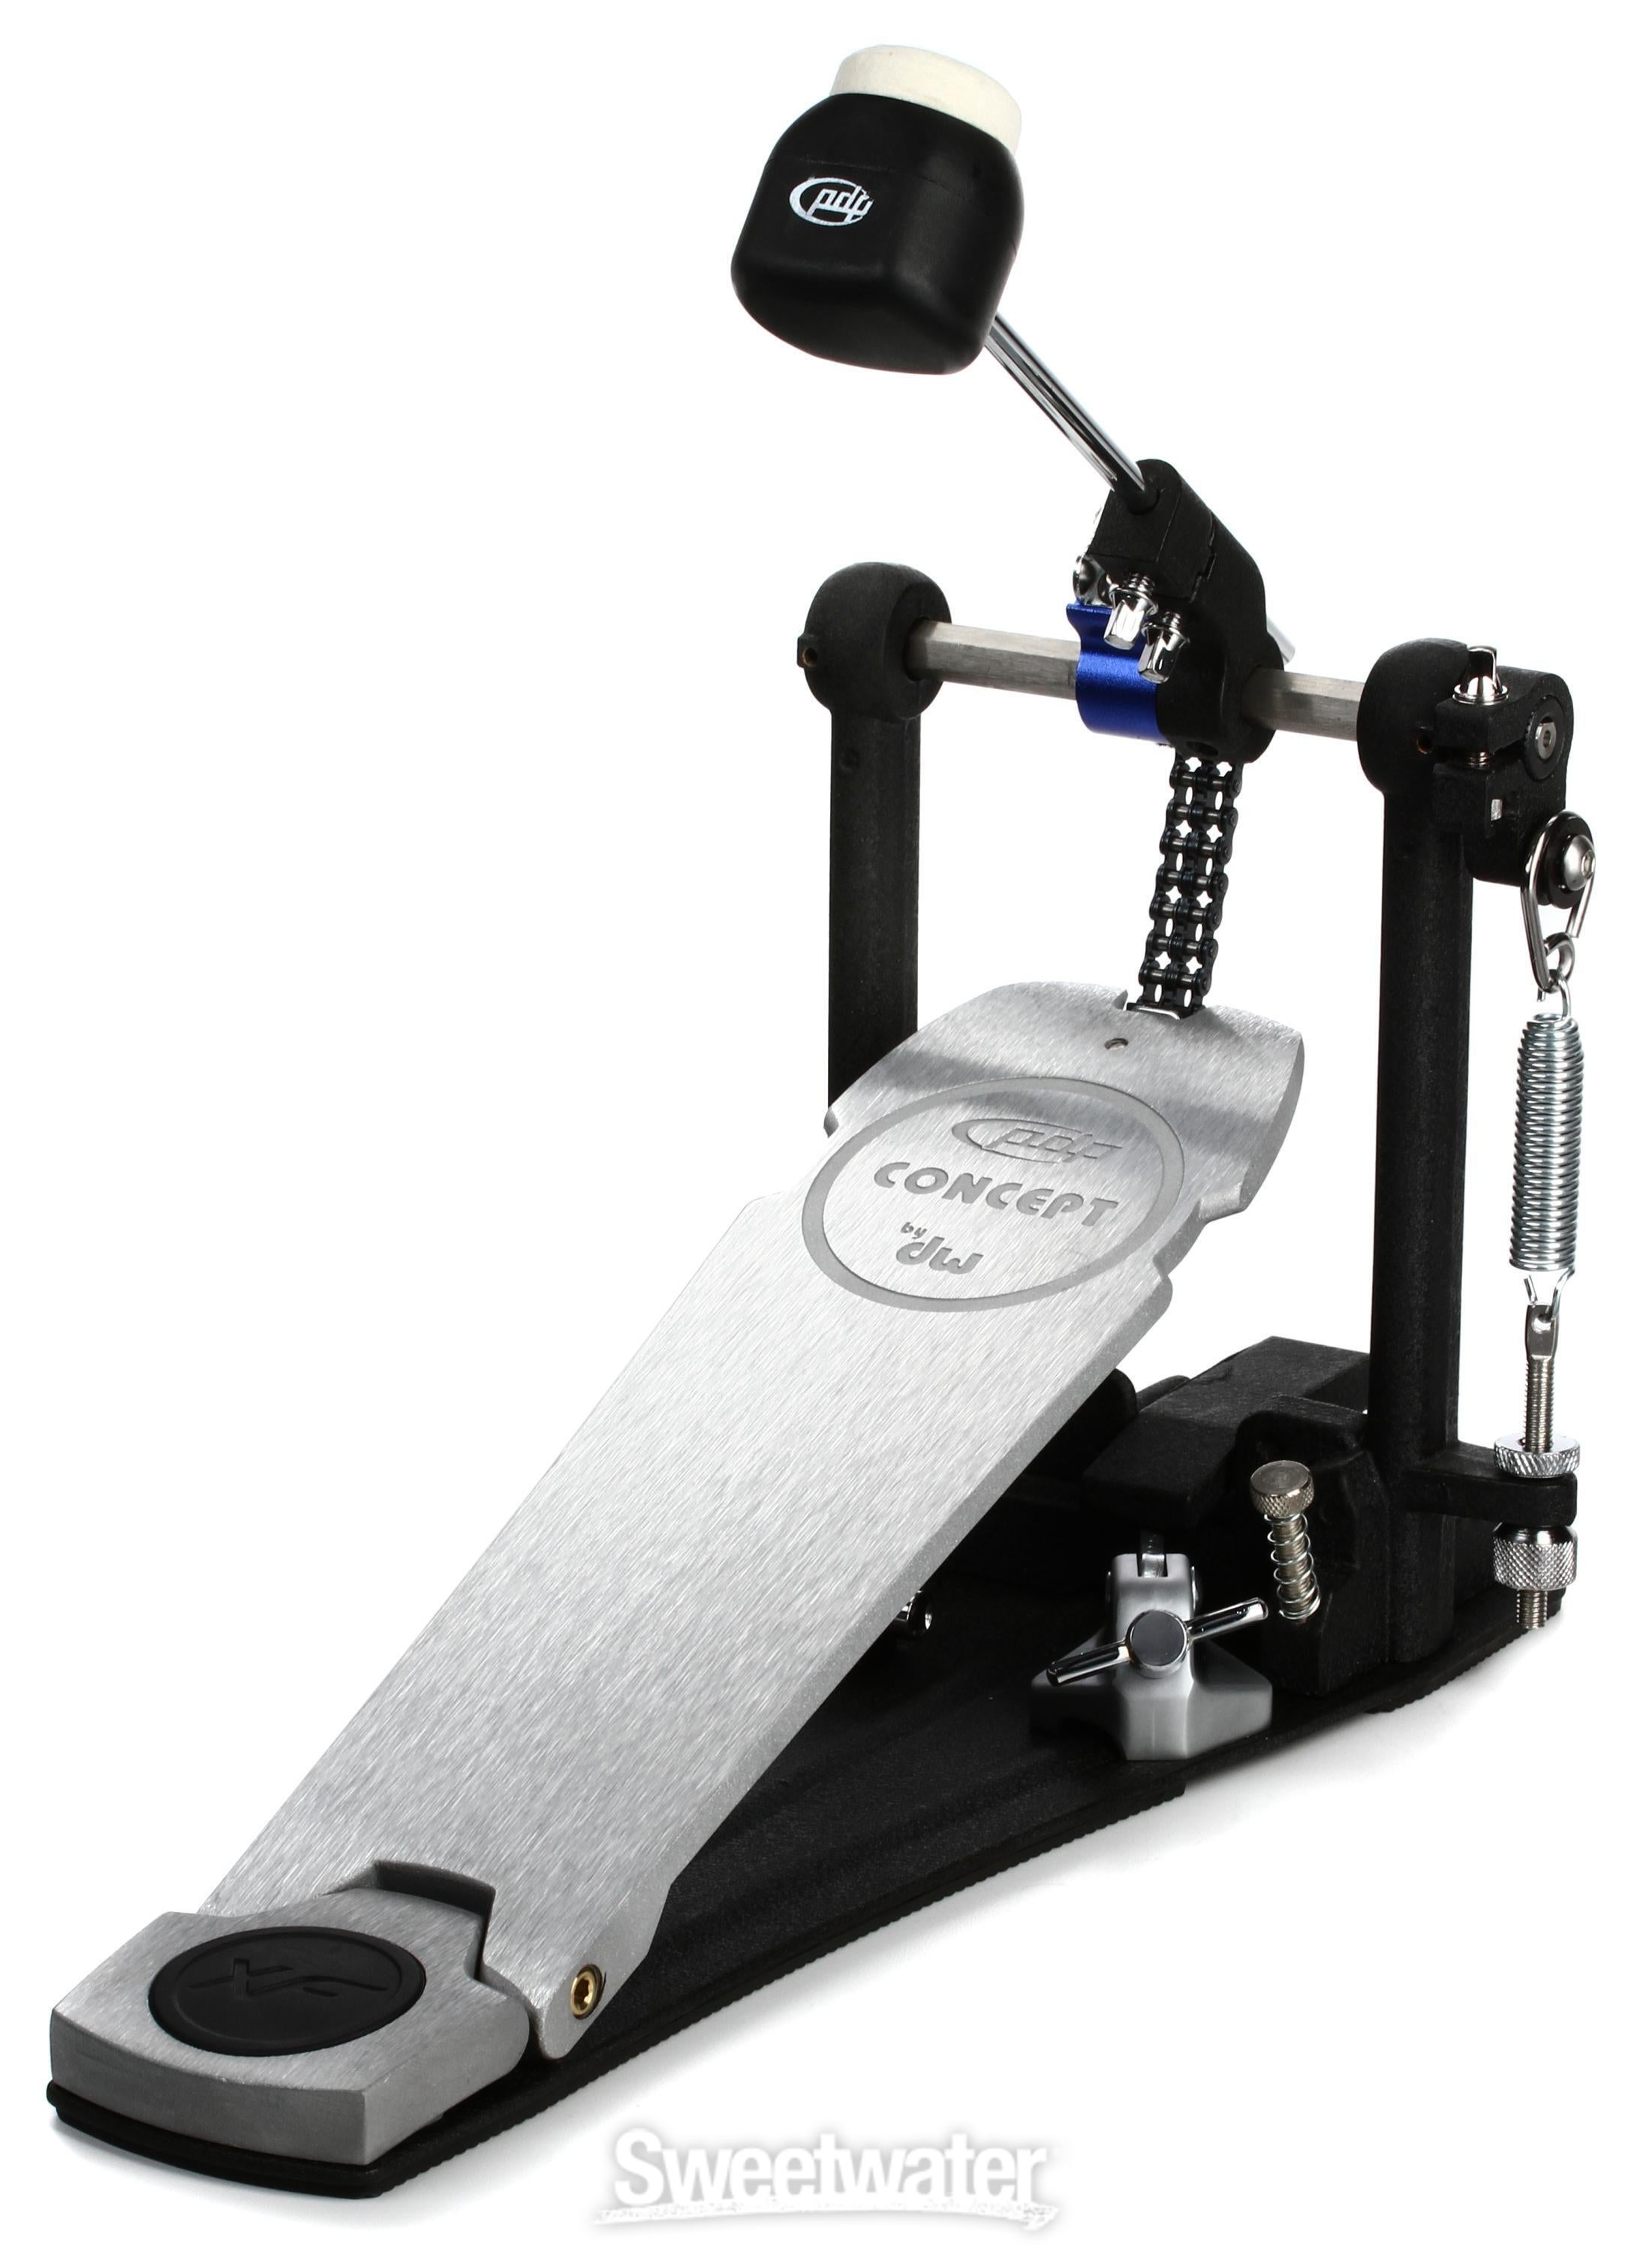 PDP PDSPCXF Concept Single Bass Drum Pedal Reviews | Sweetwater